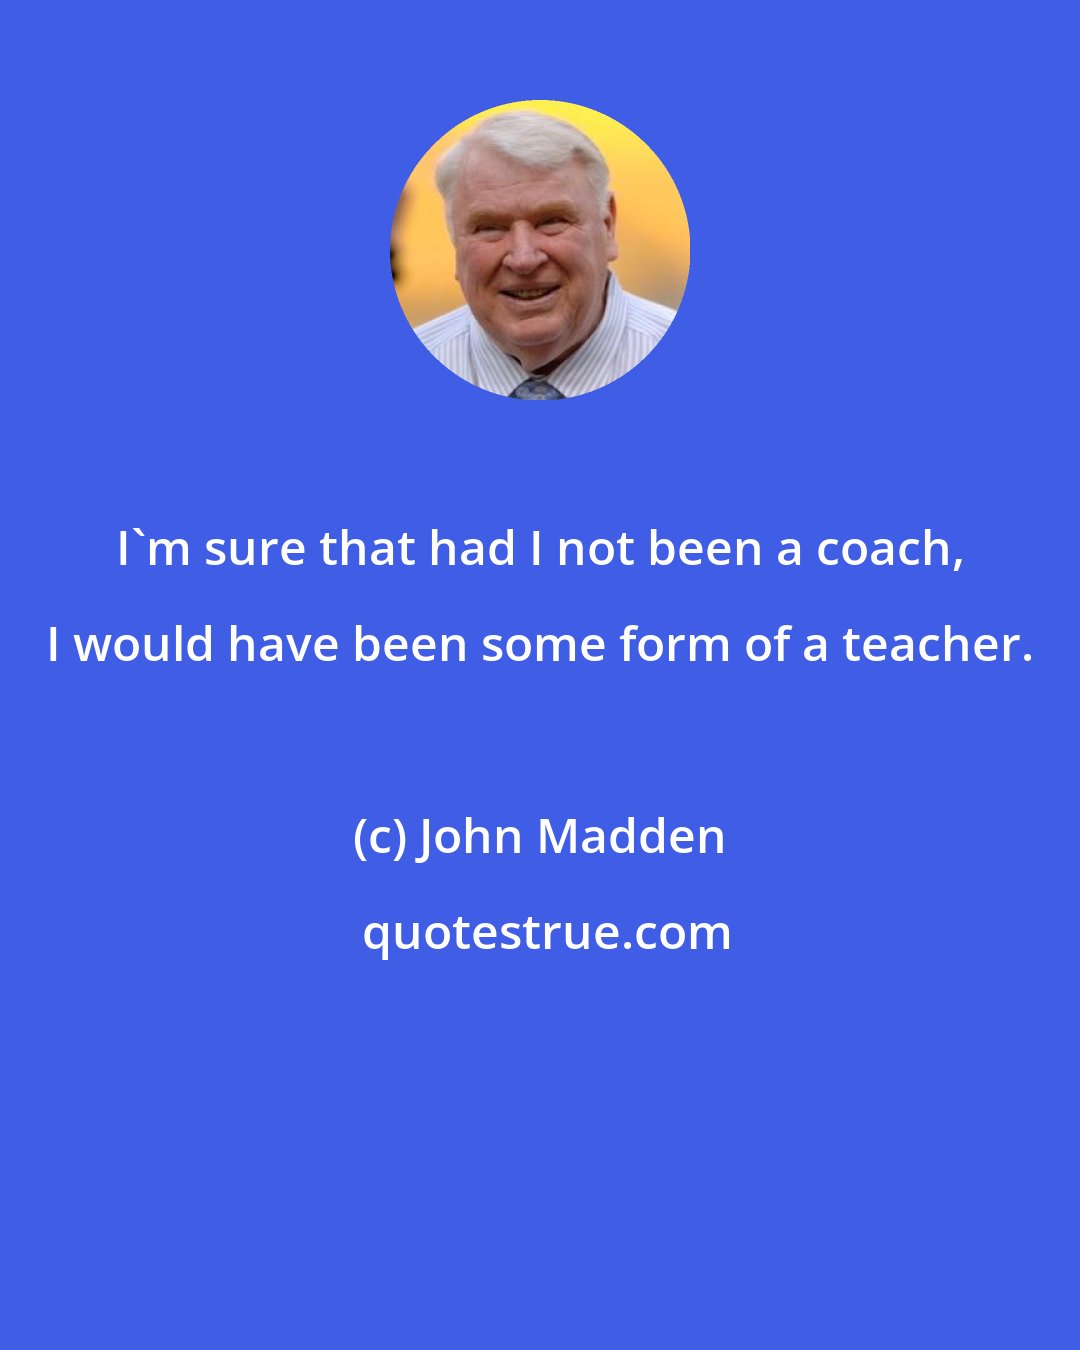 John Madden: I'm sure that had I not been a coach, I would have been some form of a teacher.